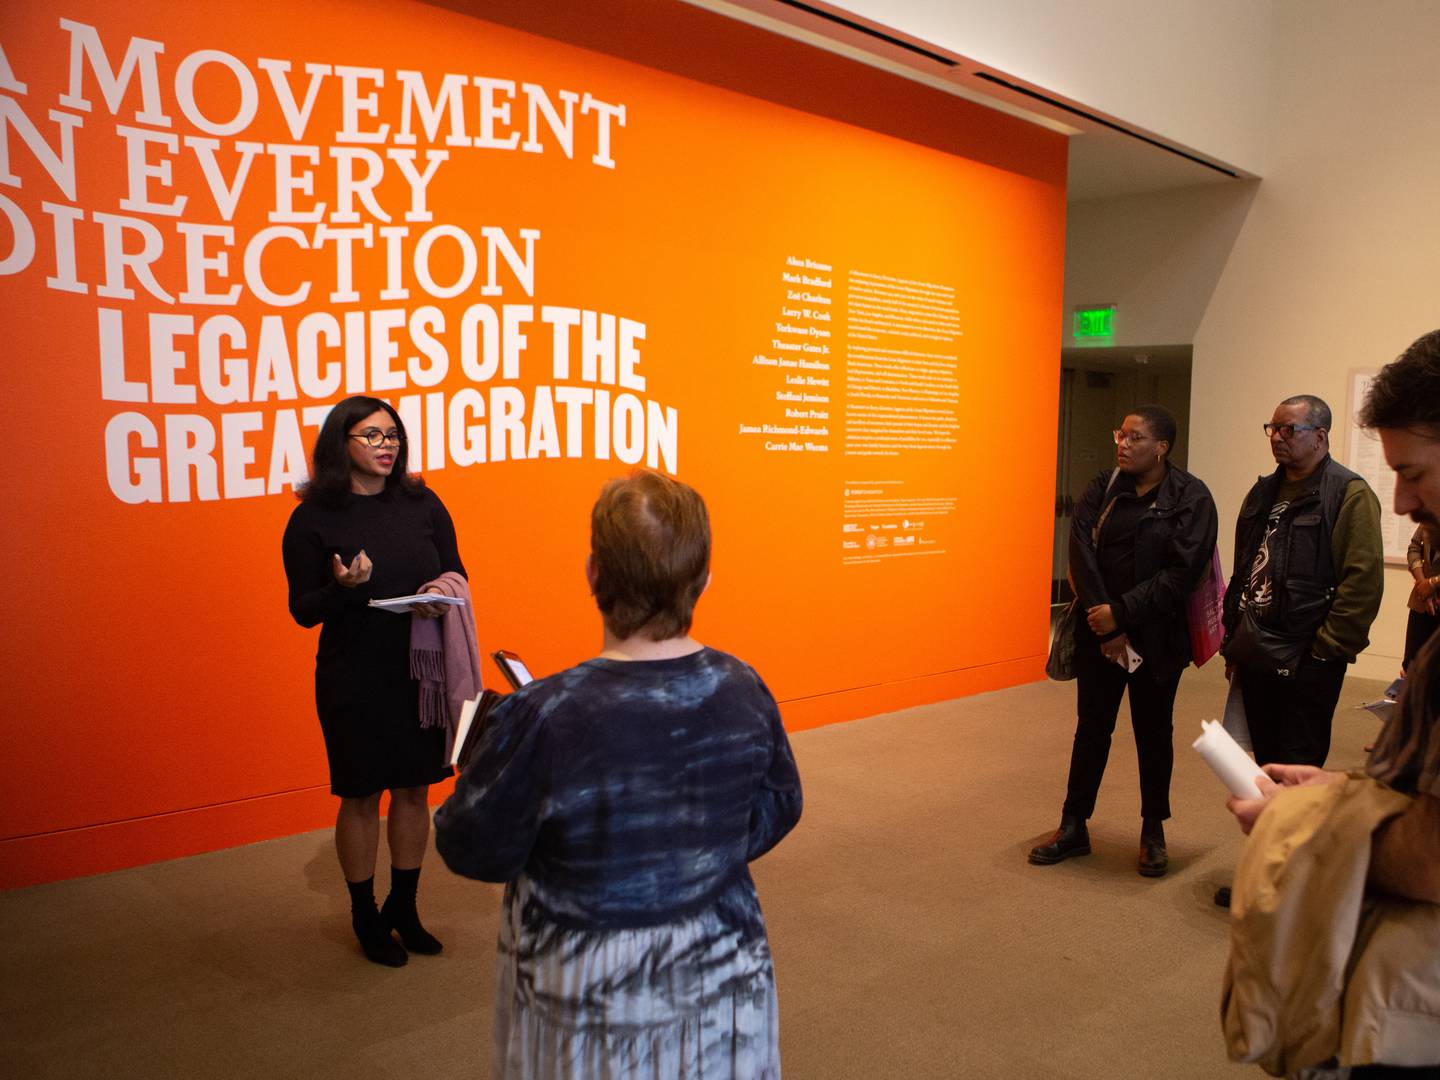 Jessica Bell Brown gives attendees a walkthrough of Baltimore Museum of Art's exhibition, "A Movement in Every Direction: Legacies of the Great Migration." The exhibition showcases artists whose work tells the personal stories and widespread impact of the Great Migration.